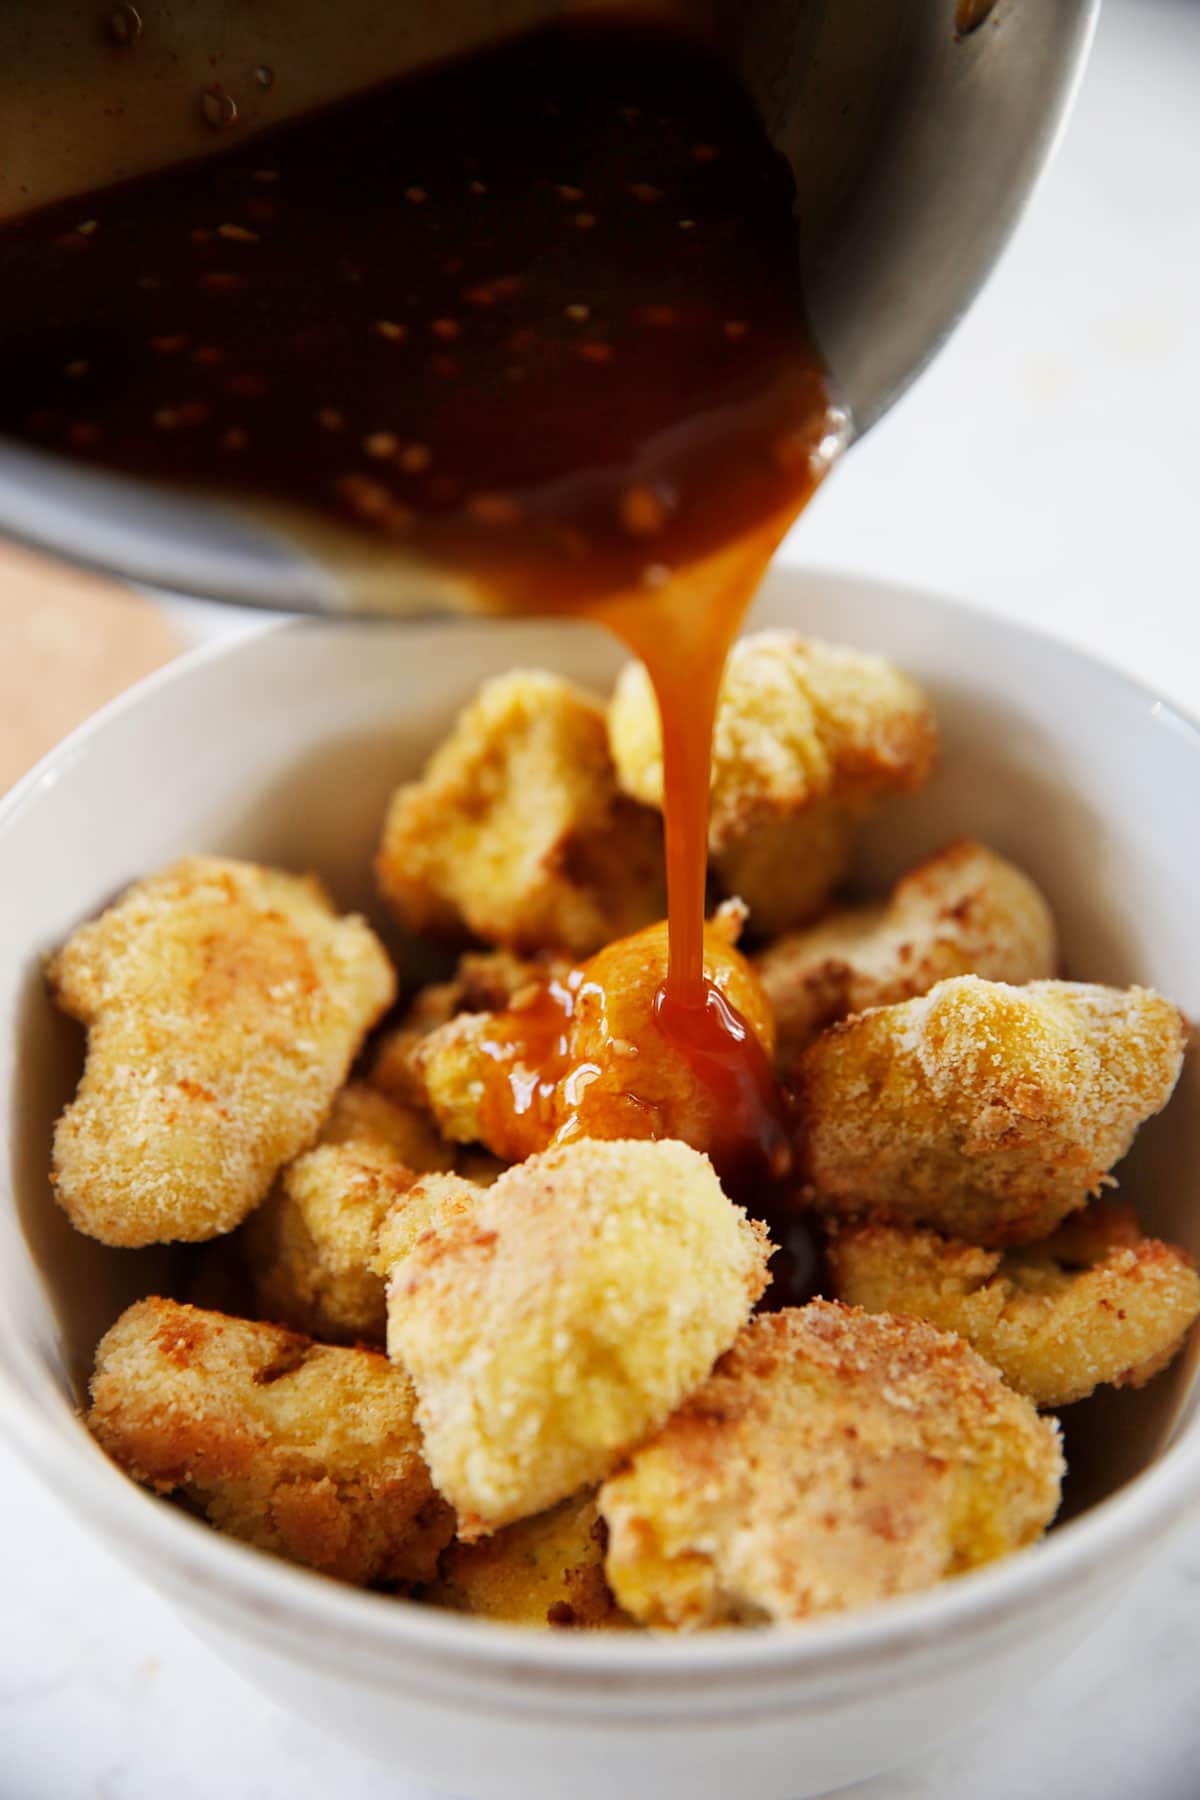 Sauce being poured over cauliflower wings.